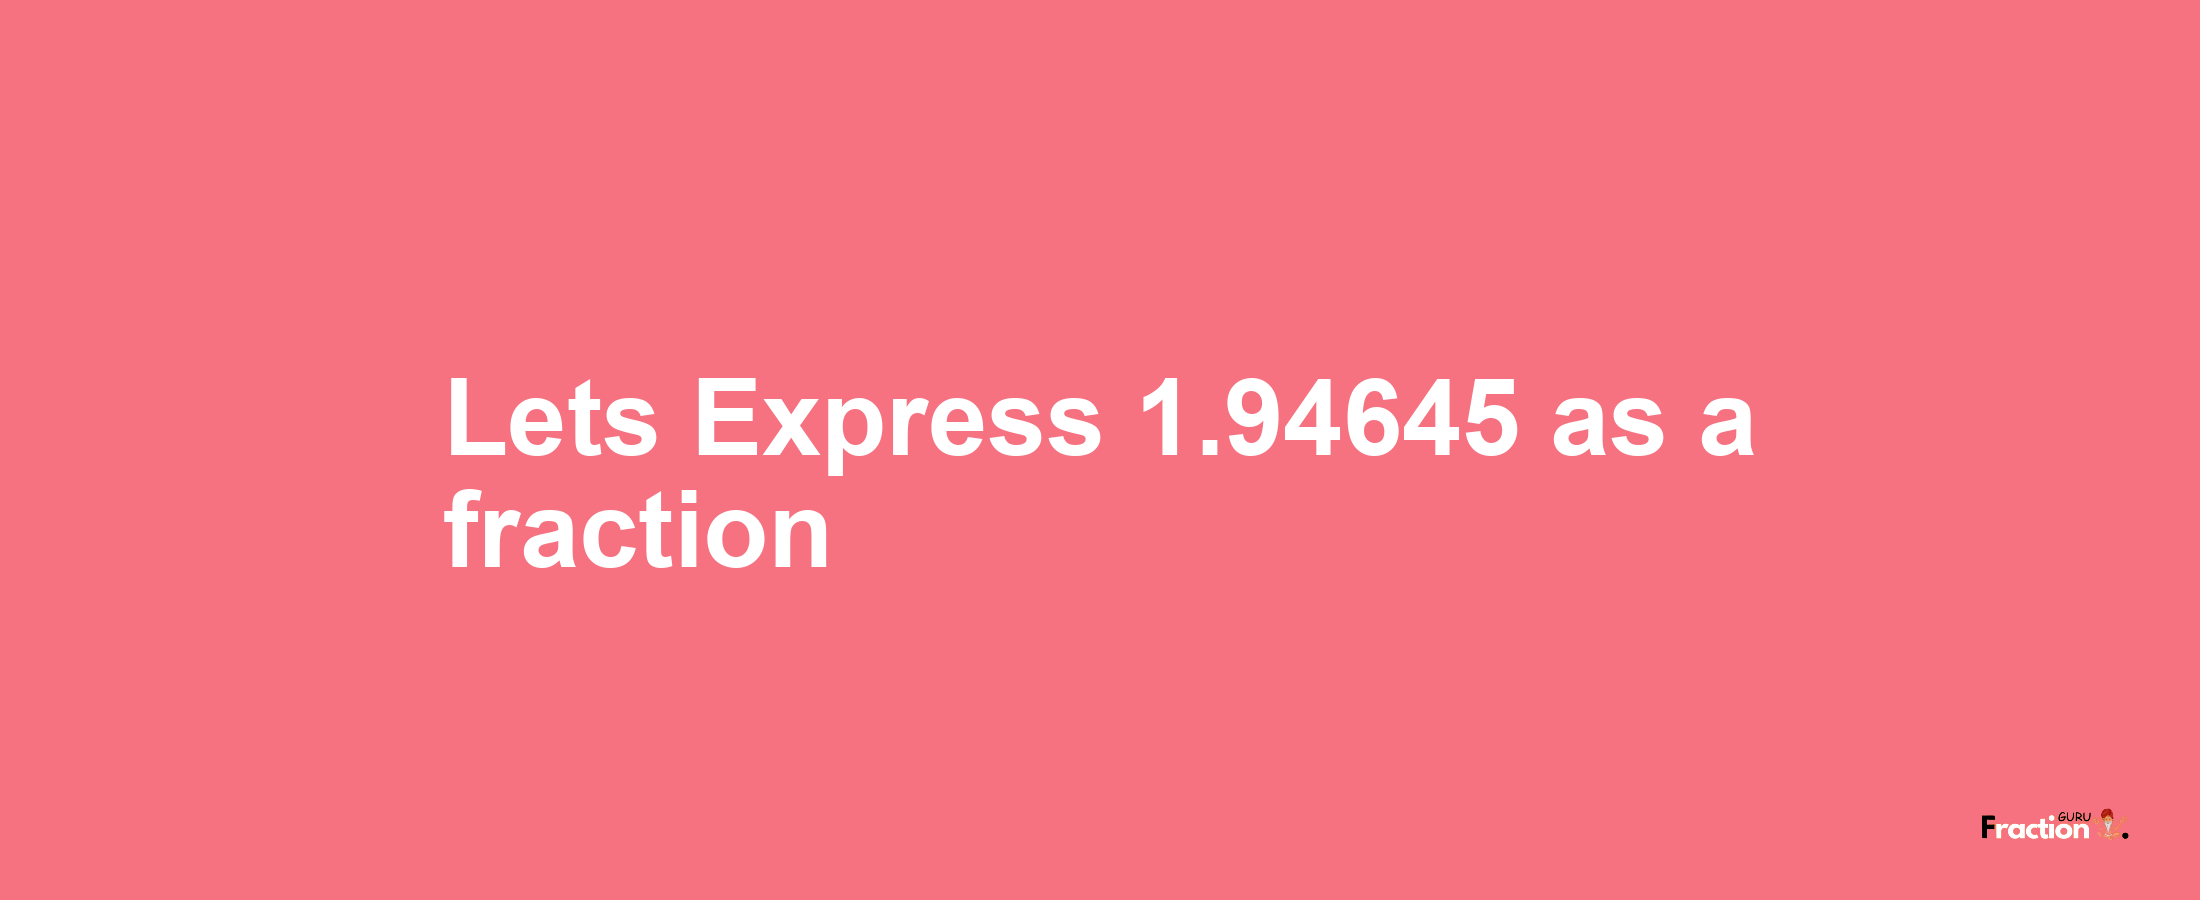 Lets Express 1.94645 as afraction